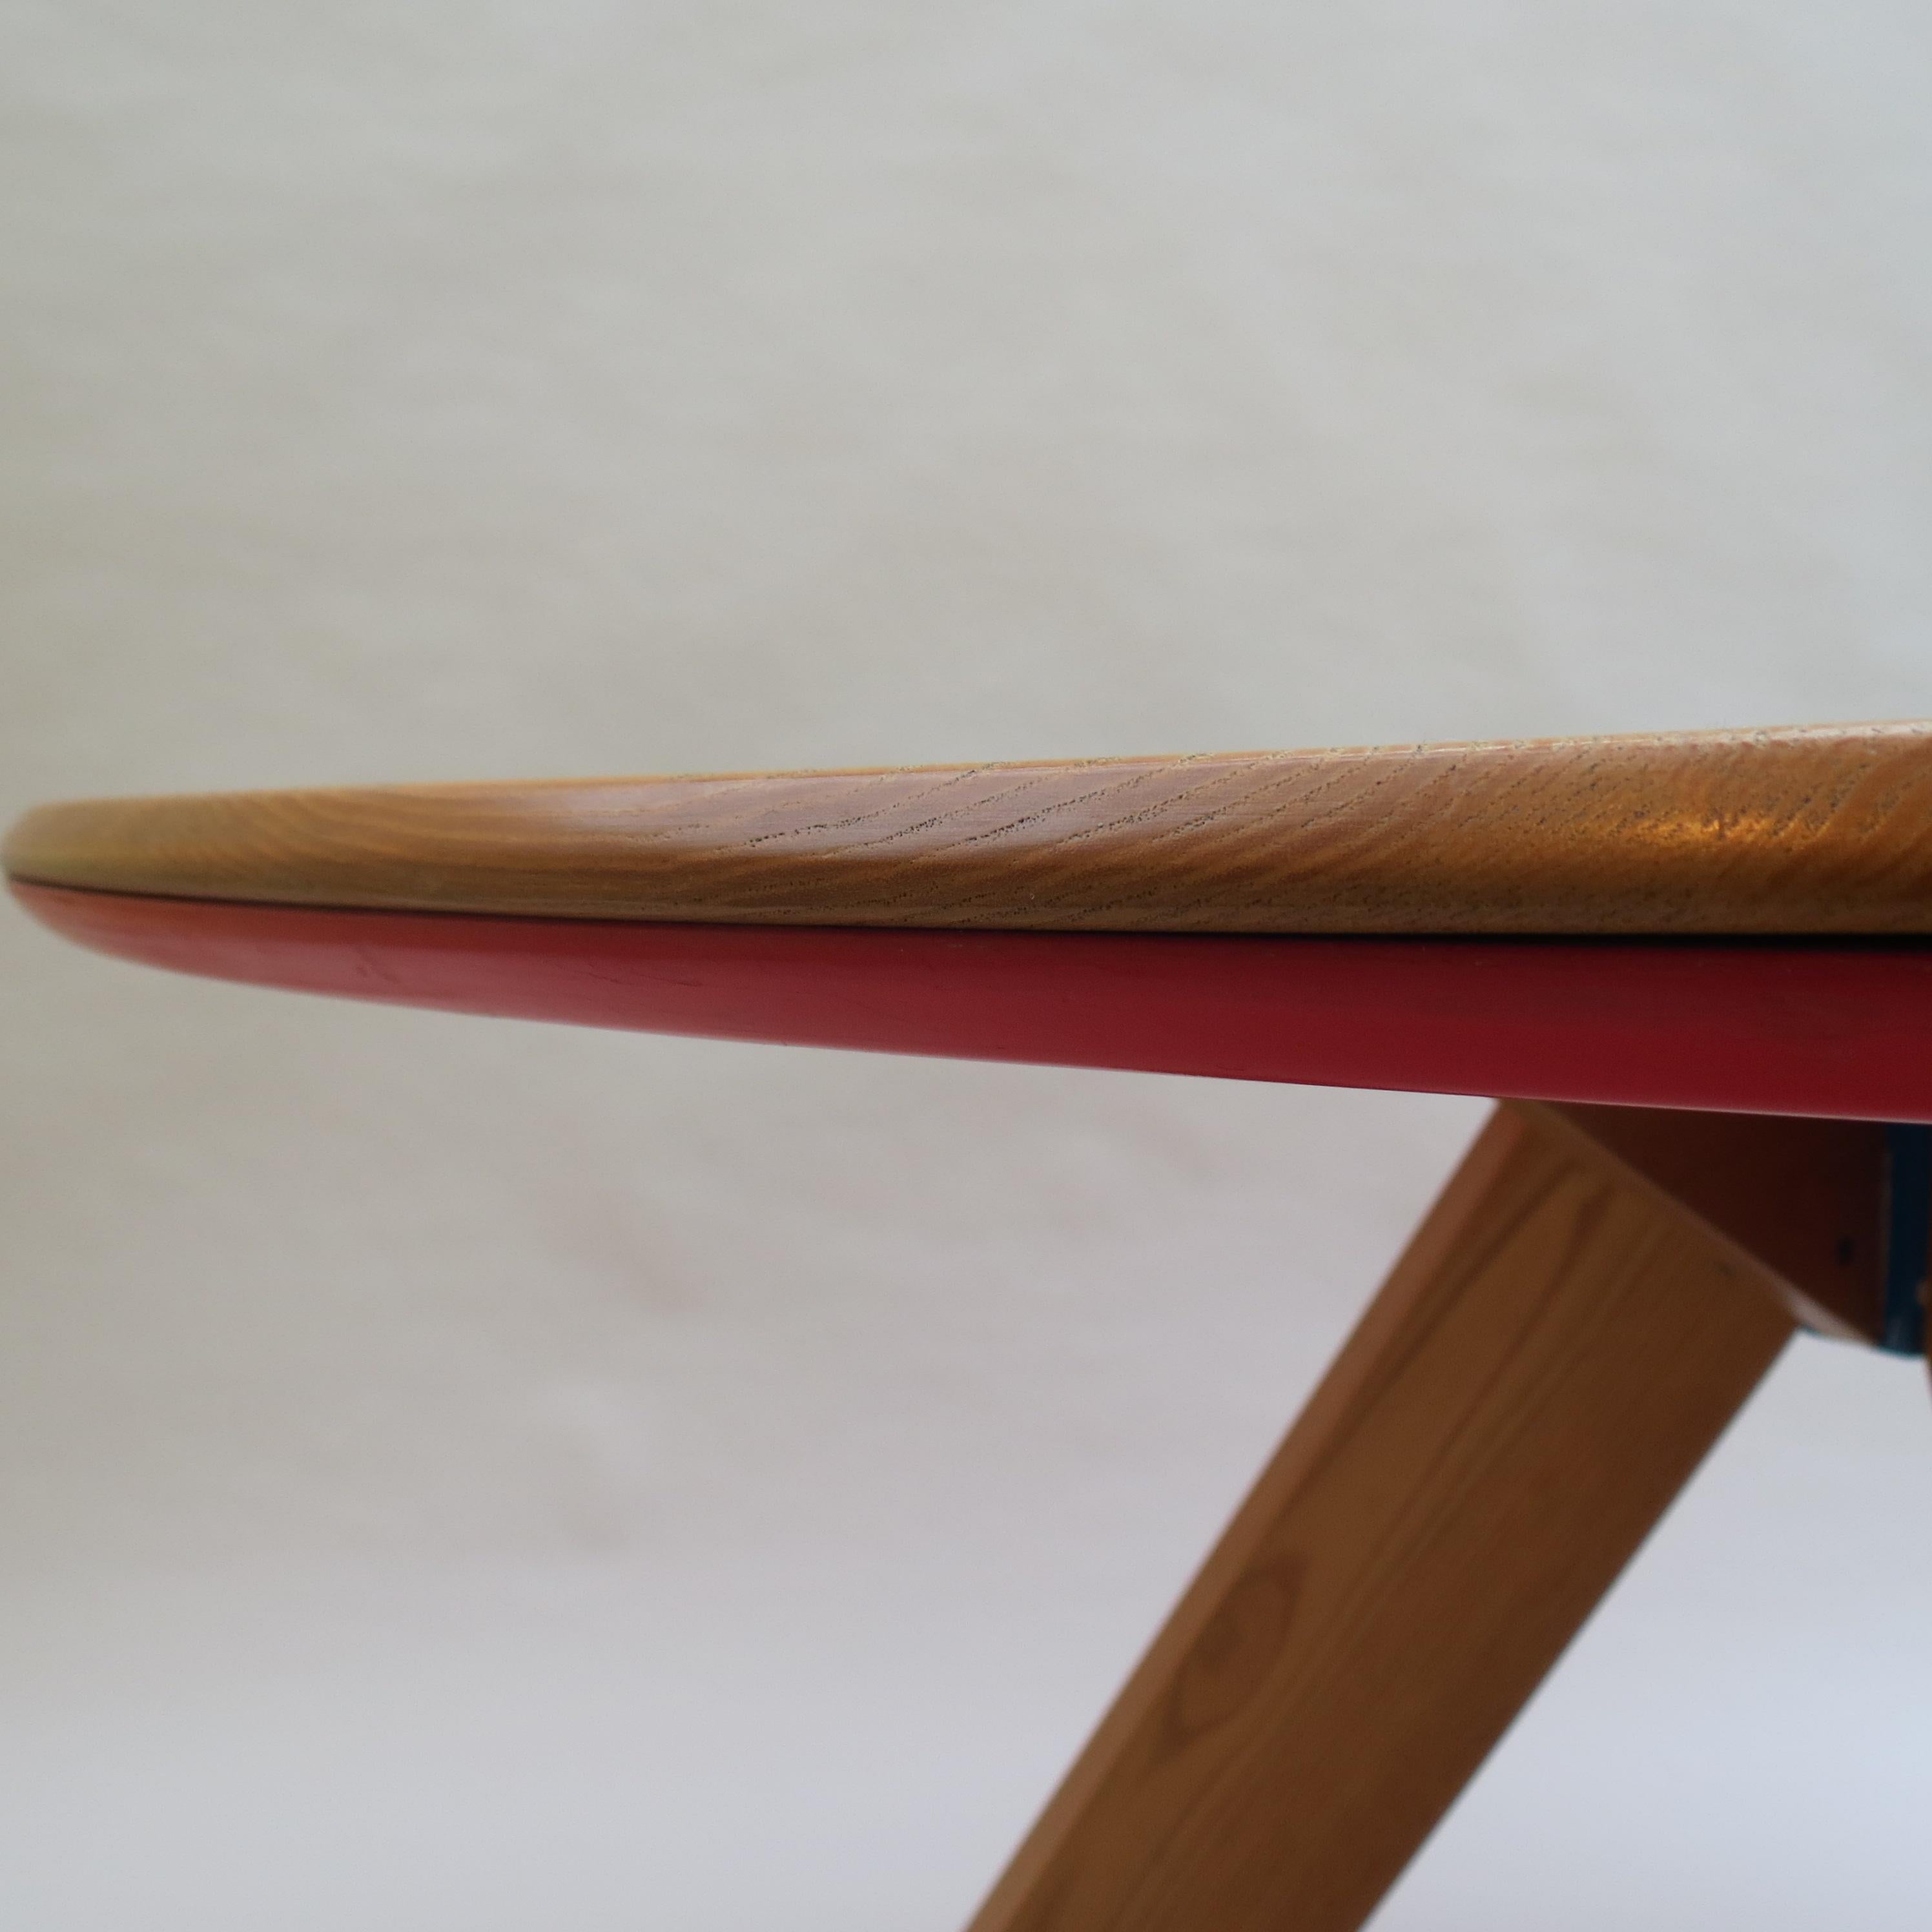 Midcentury Bespoke Circular Ash Dining Table by David Field 1980s with Red Blue 2